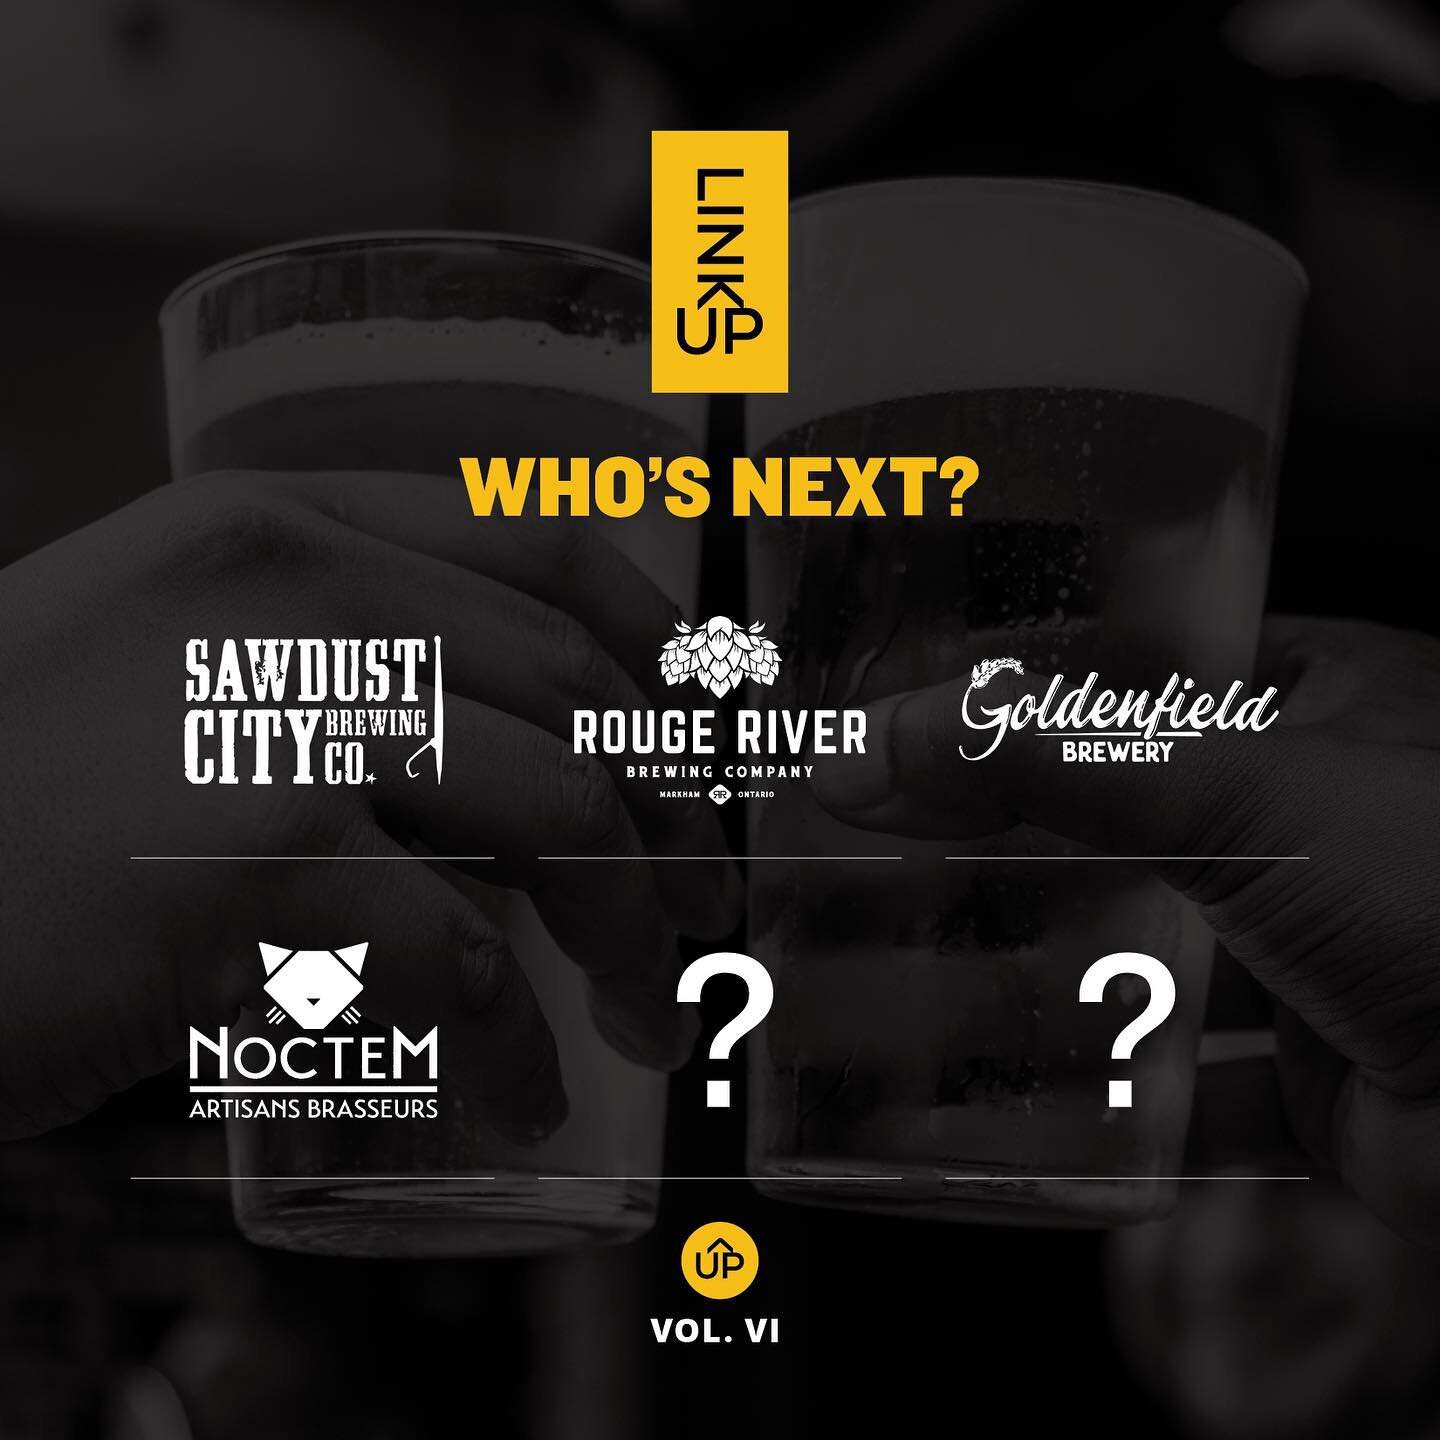 Four weeks down, two weeks to go. The legends at @sawdustcitybeer, @rougeriverbrewery, @goldenfieldbrewery and @noctem_artisans_brasseurs delivered phenomenal Link Up beers. Who do you think is dropping in Week 5? 🤔